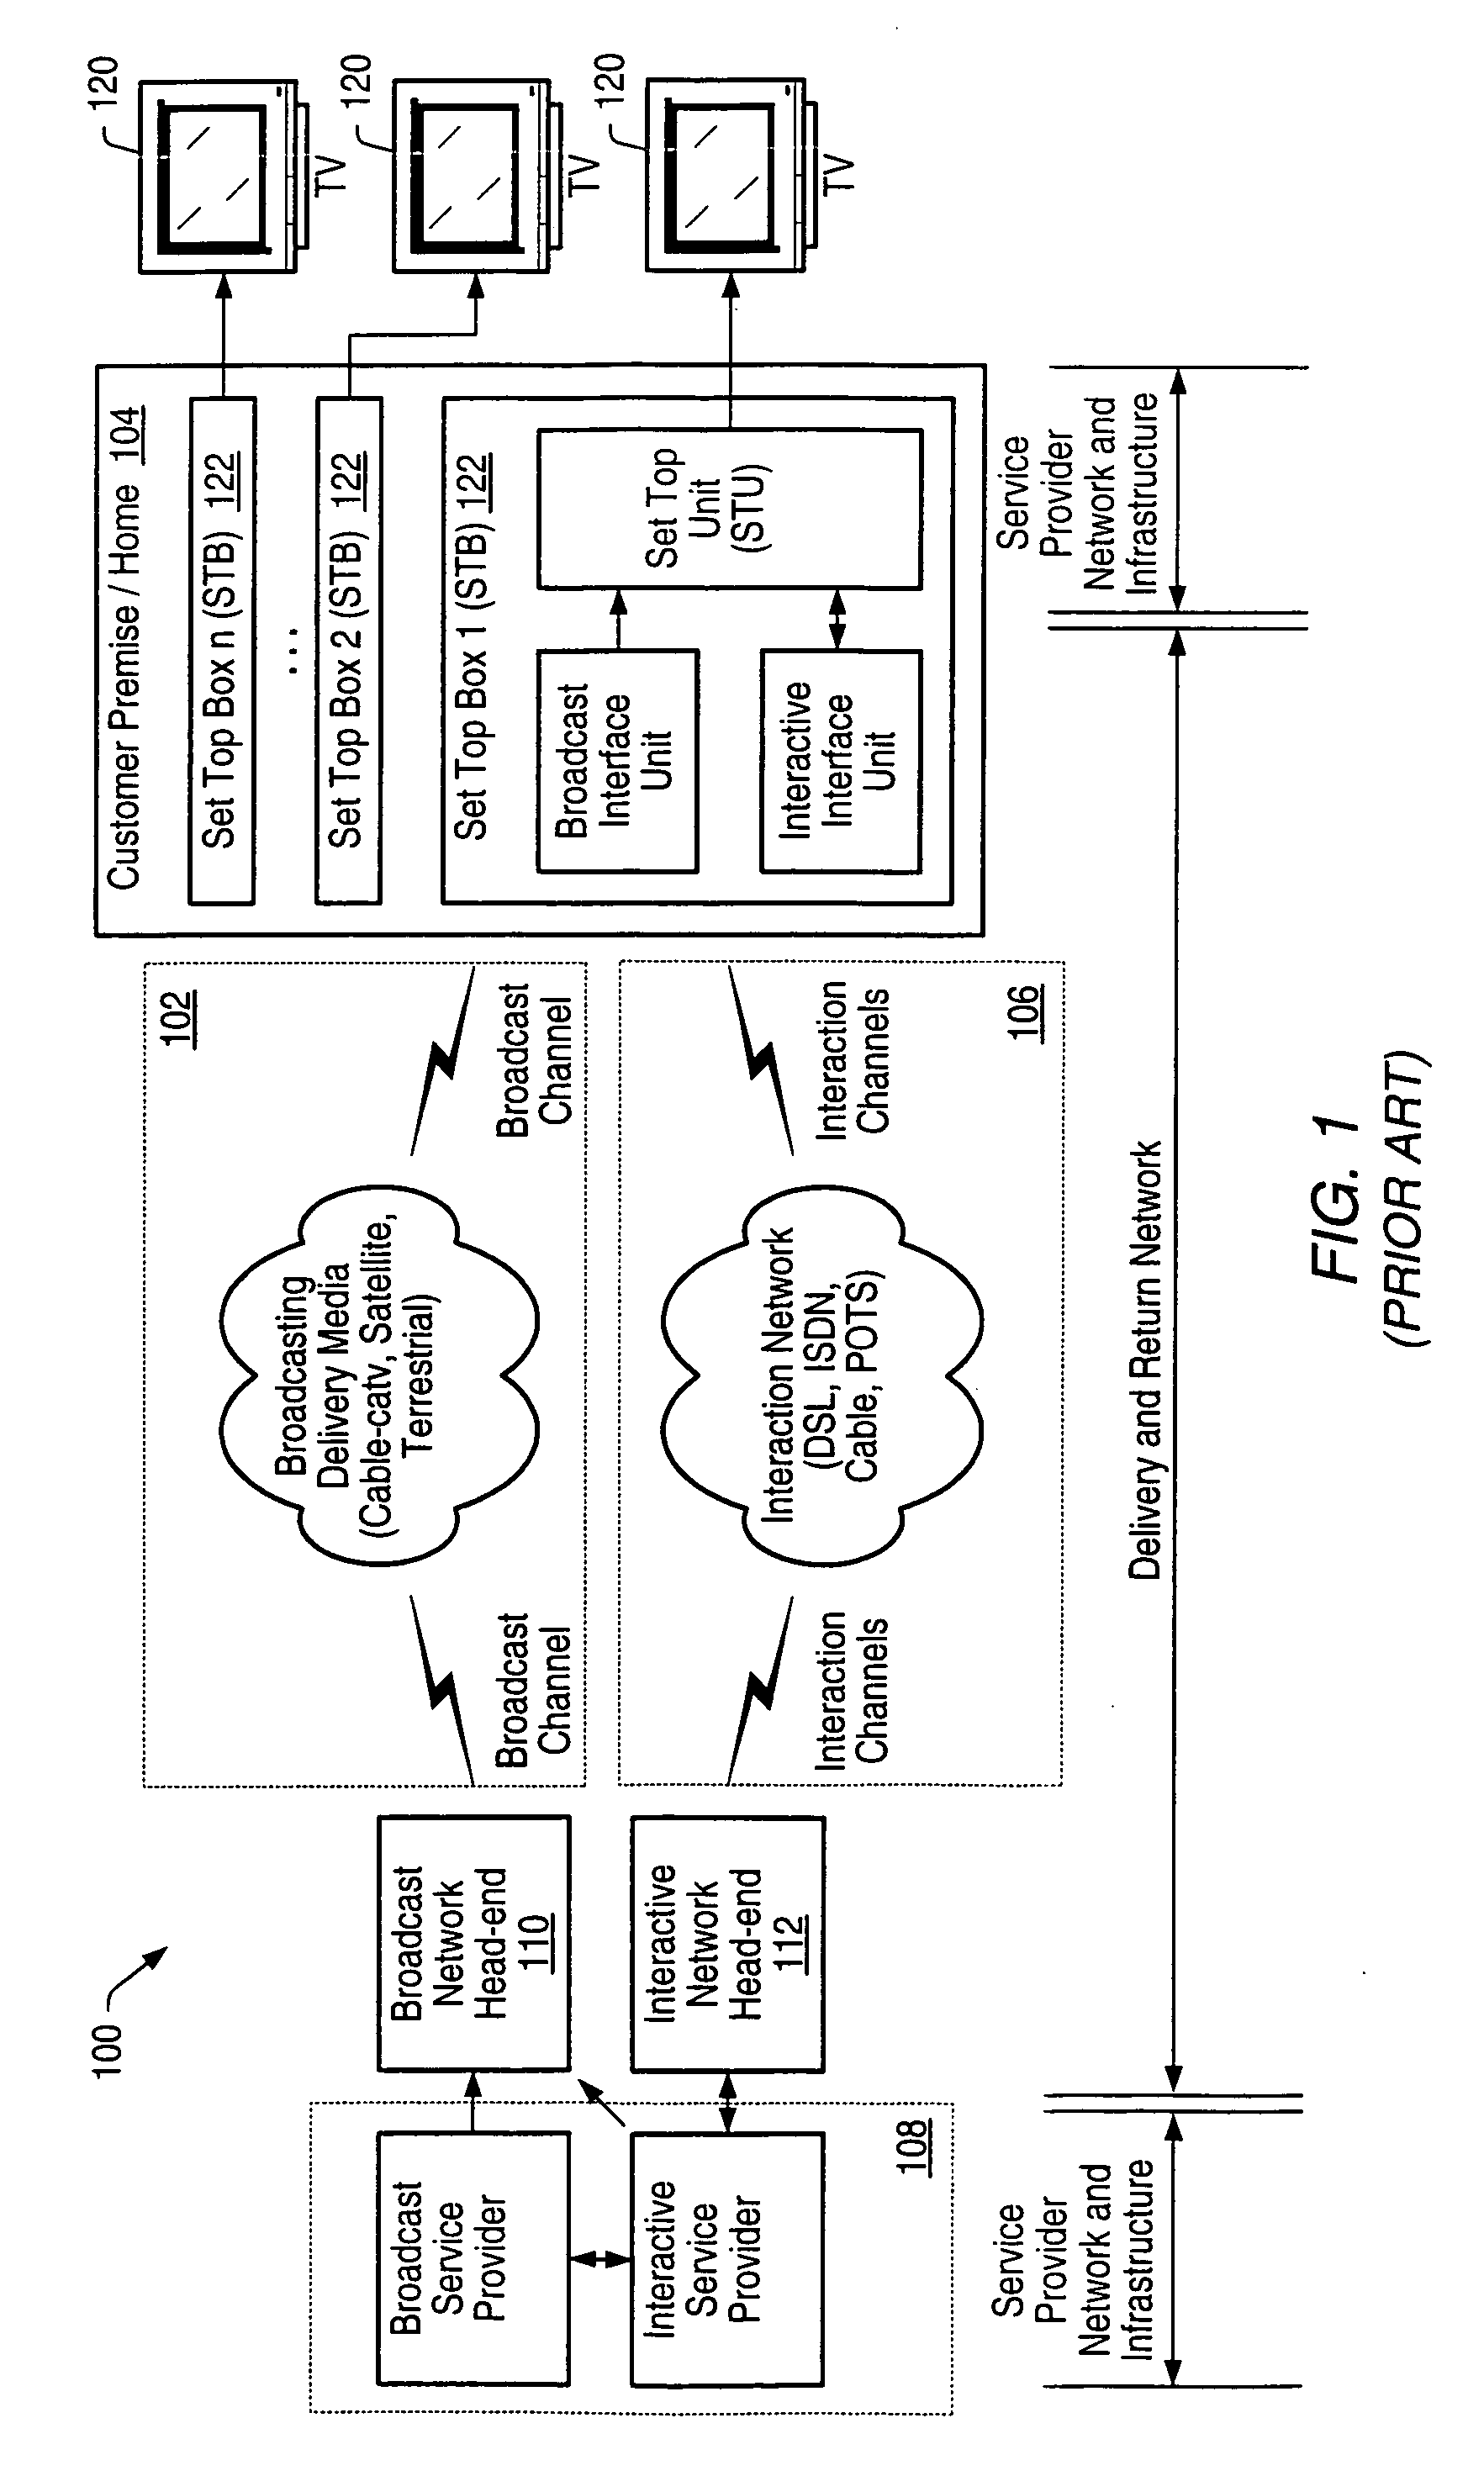 High speed ethernet MAC and PHY apparatus with a filter based ethernet packet router with priority queuing and single or multiple transport stream interfaces